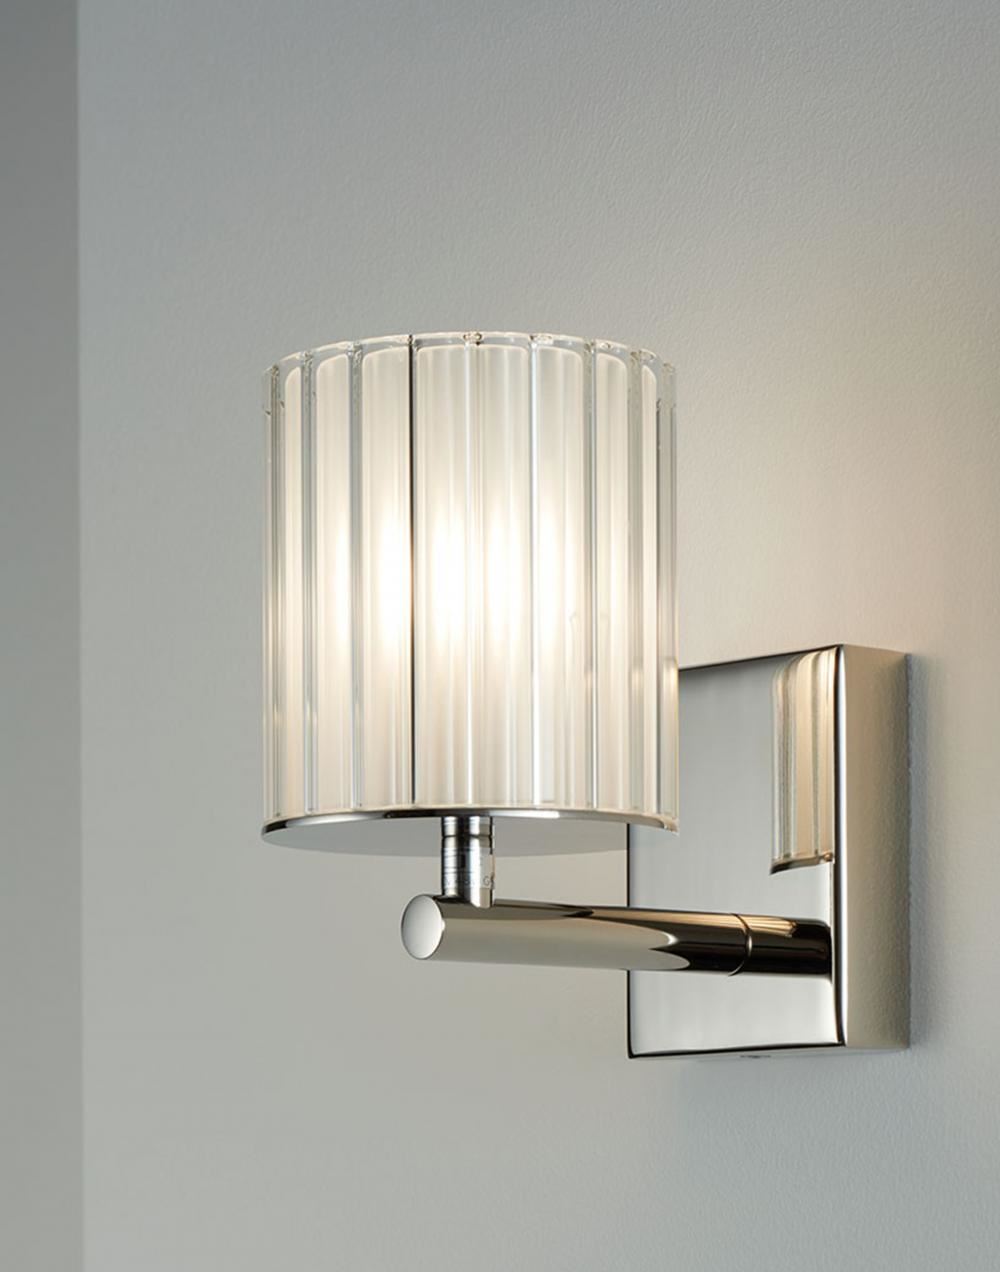 Flute Wall Lights Small Single Brushed Nickel